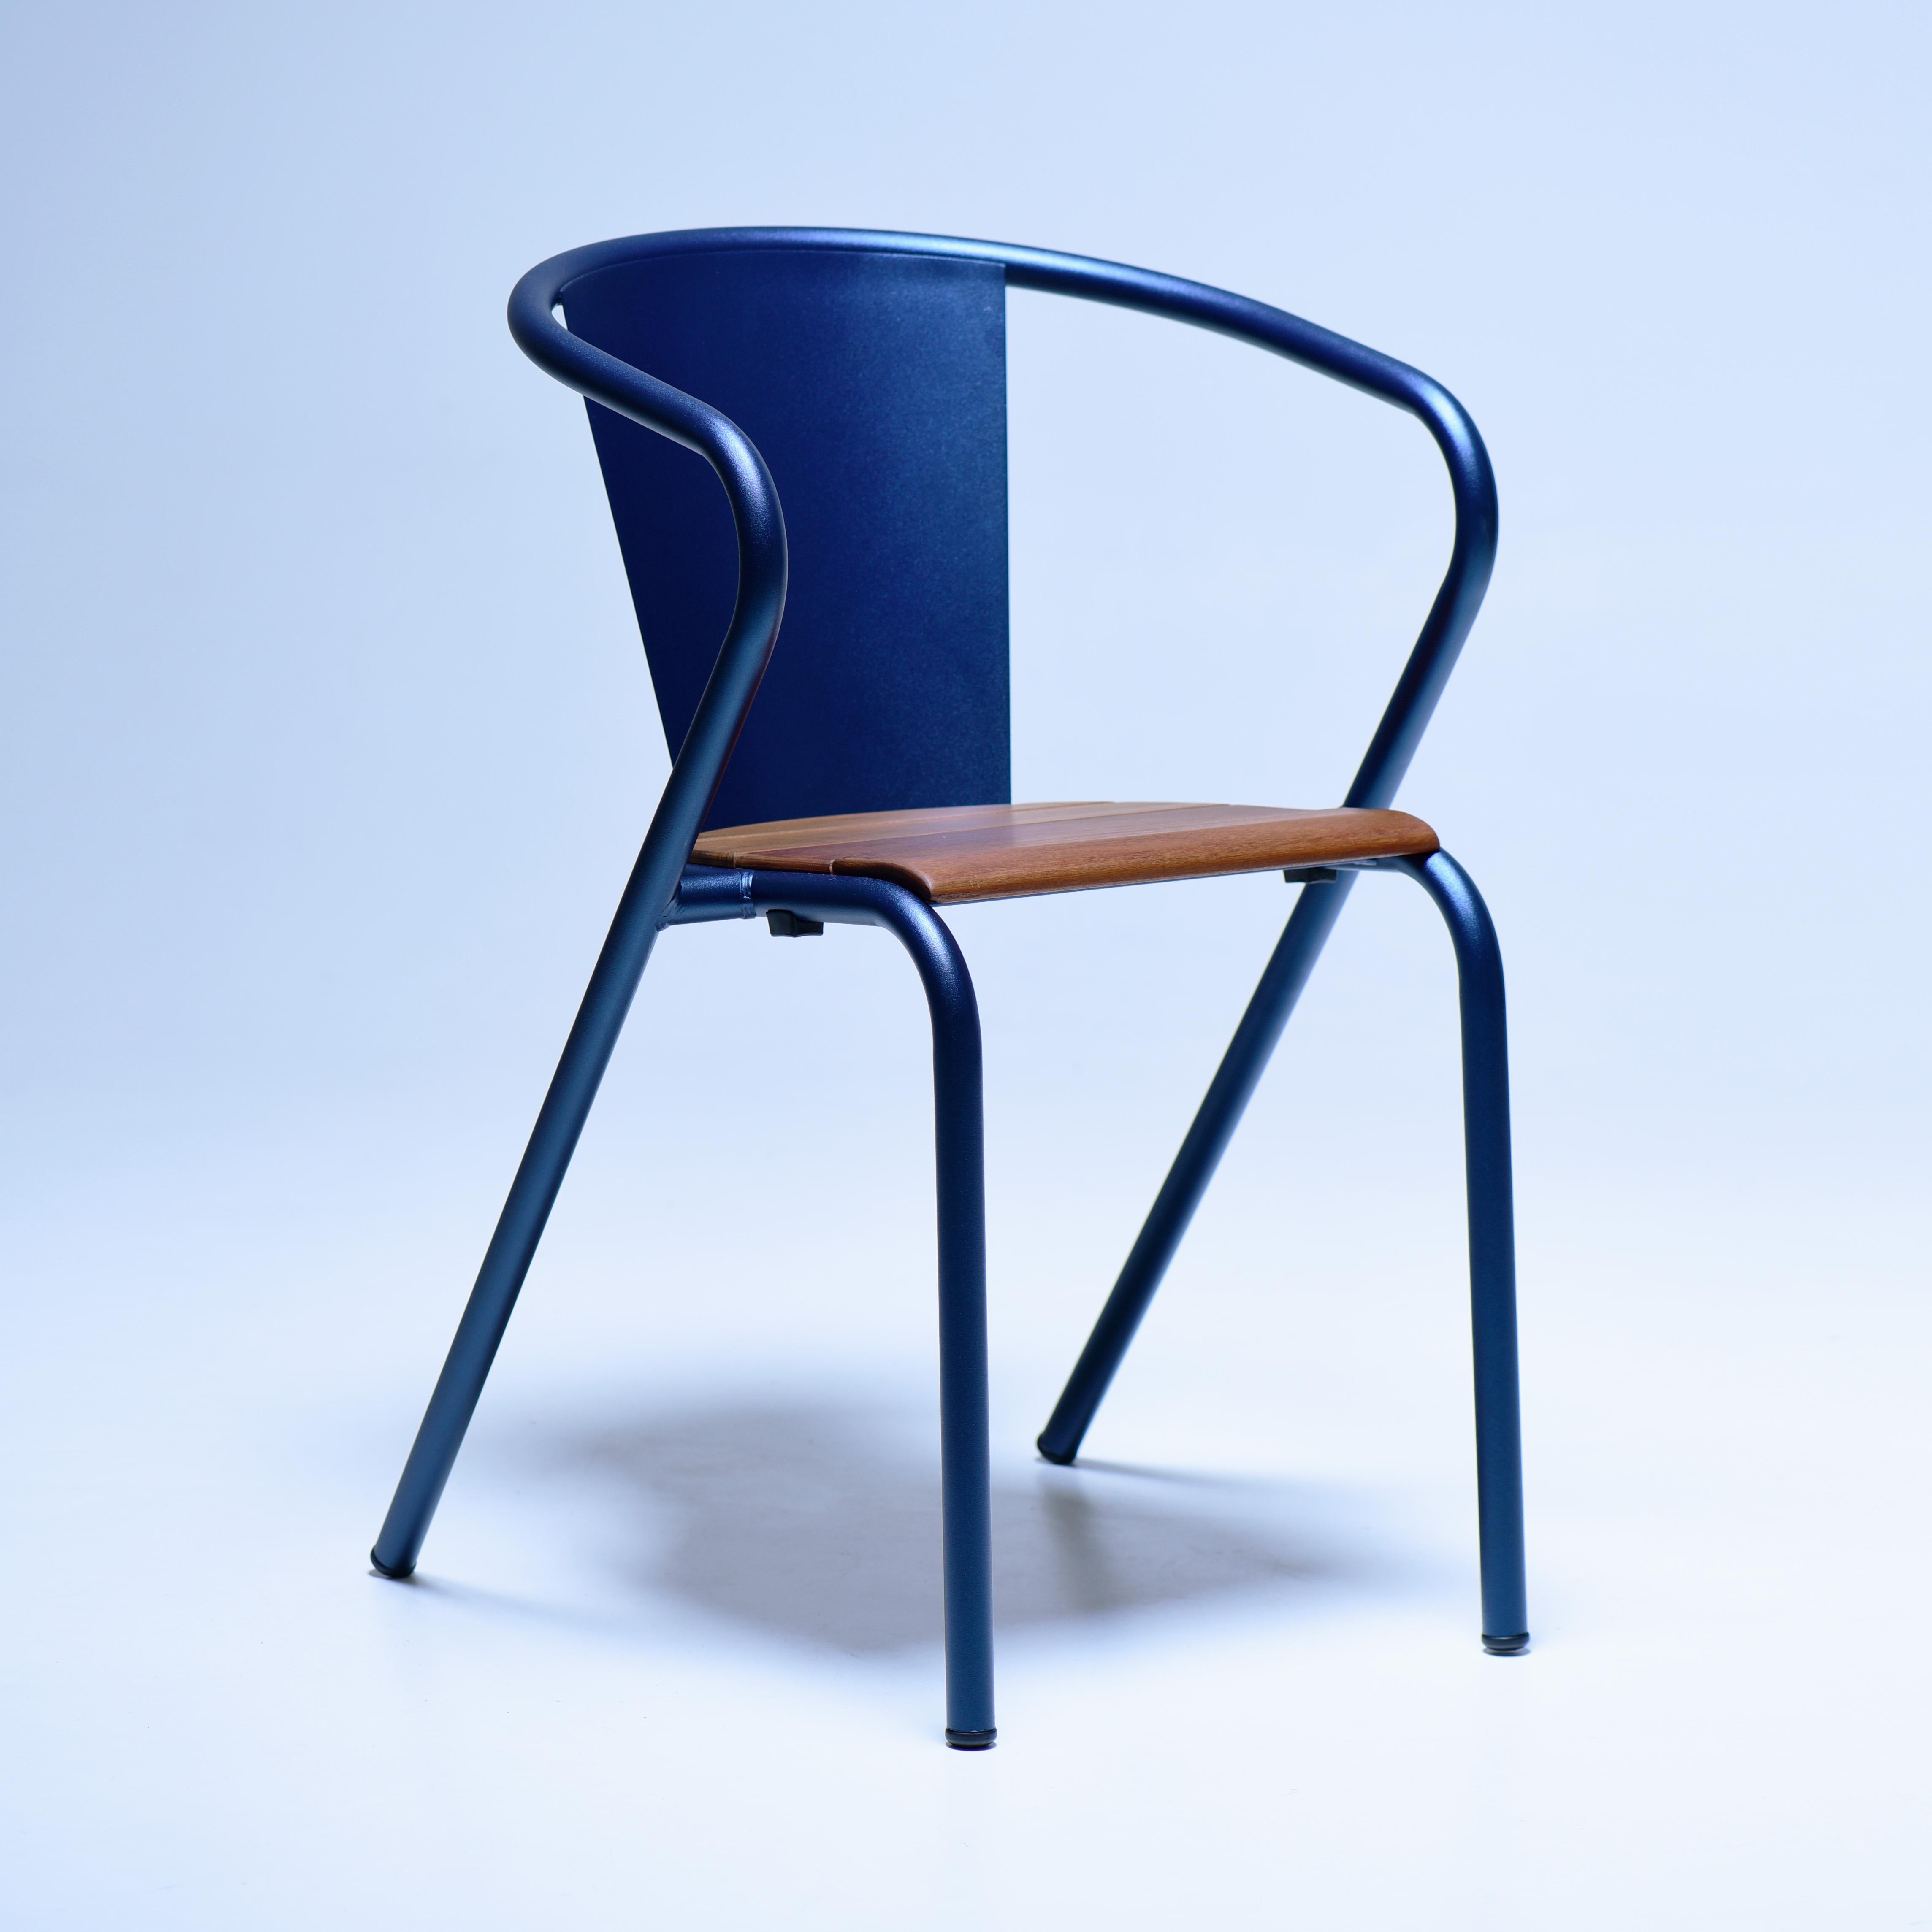 Powder-Coated Redesign of the iconic 1950’s Portuguese Chair by Alexandre Caldas - Ipê wood For Sale